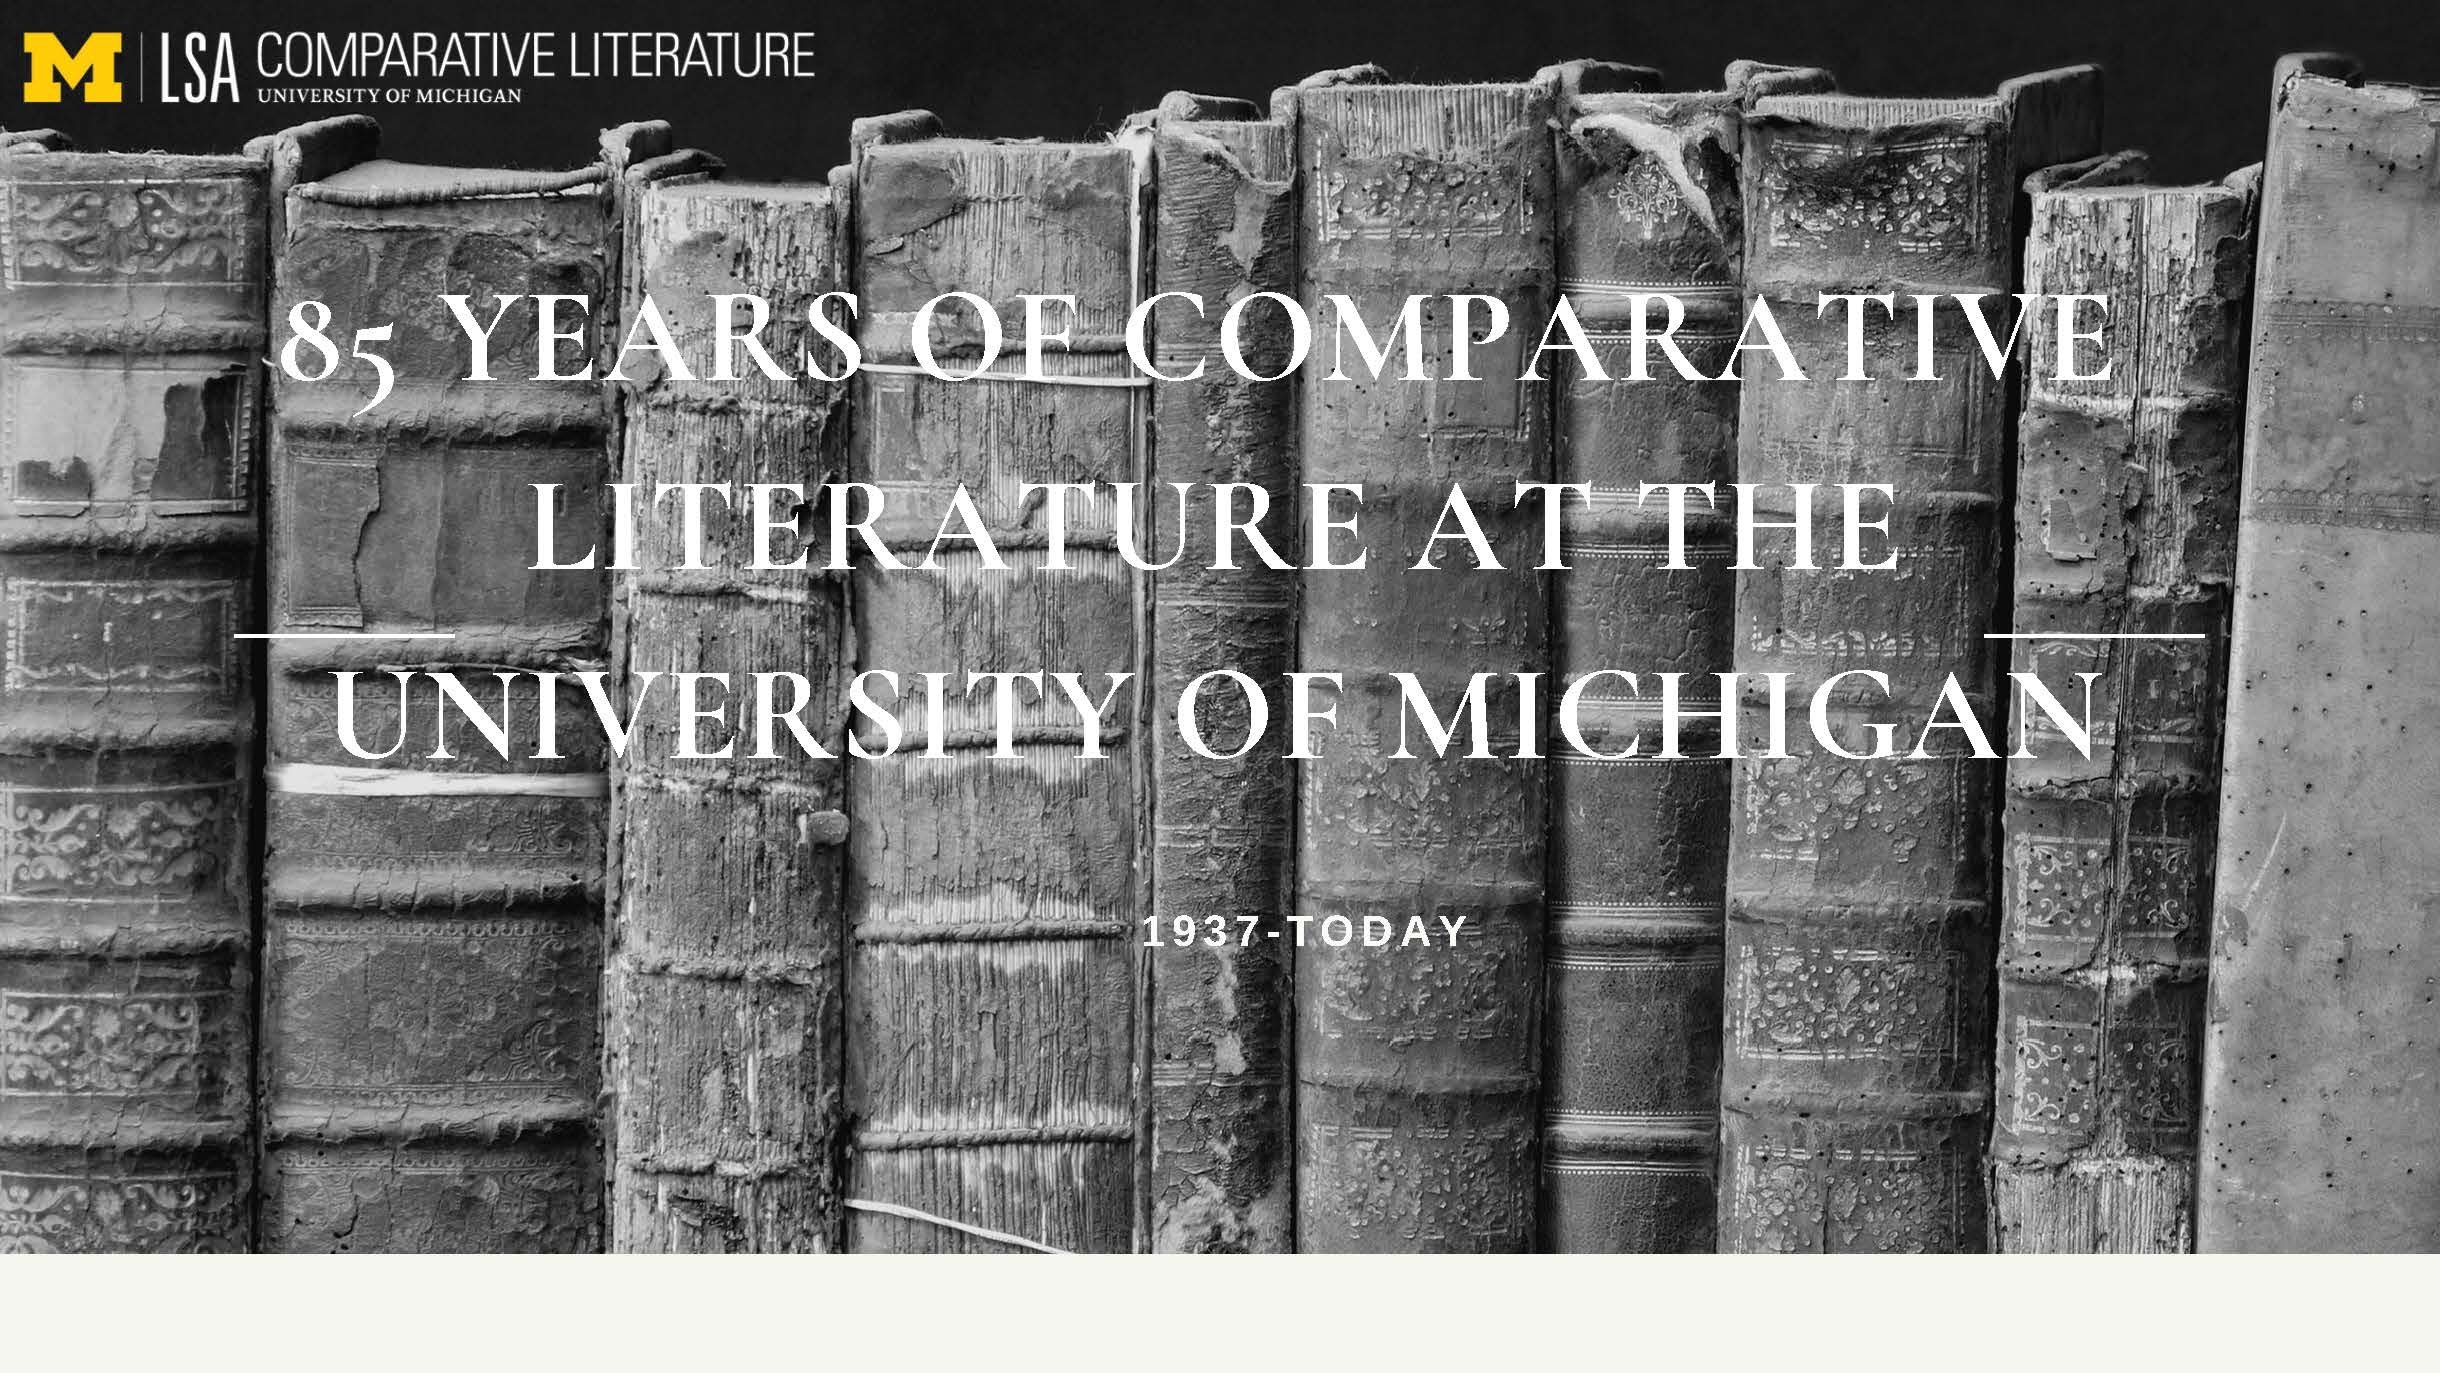 Text, "85 Years of Comparative Literature at the University of Michigan"